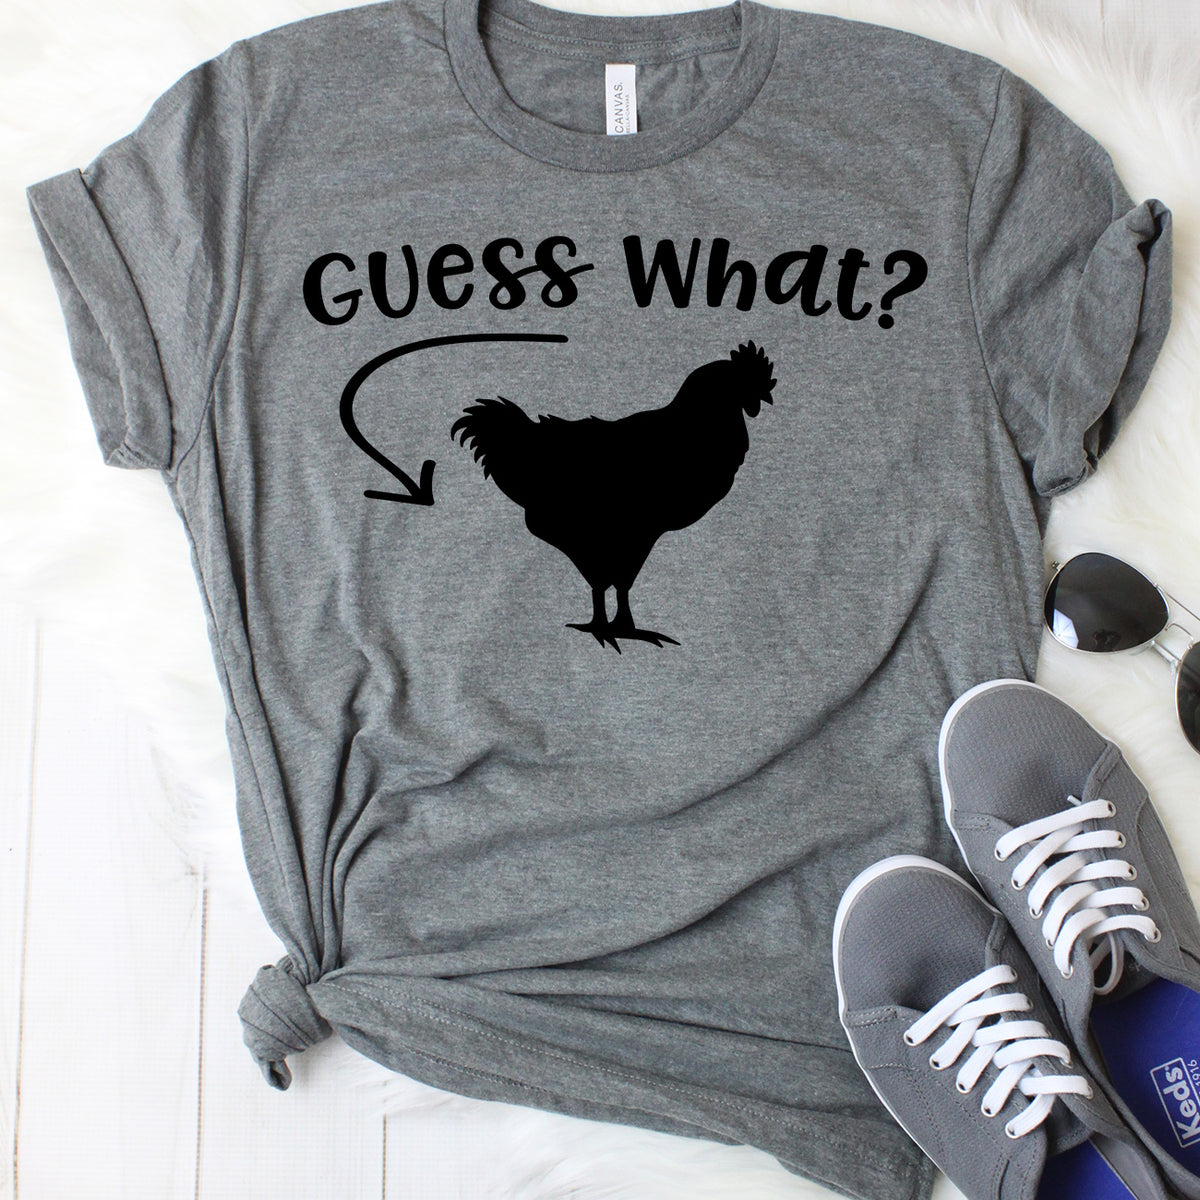 Guess What? T-Shirt